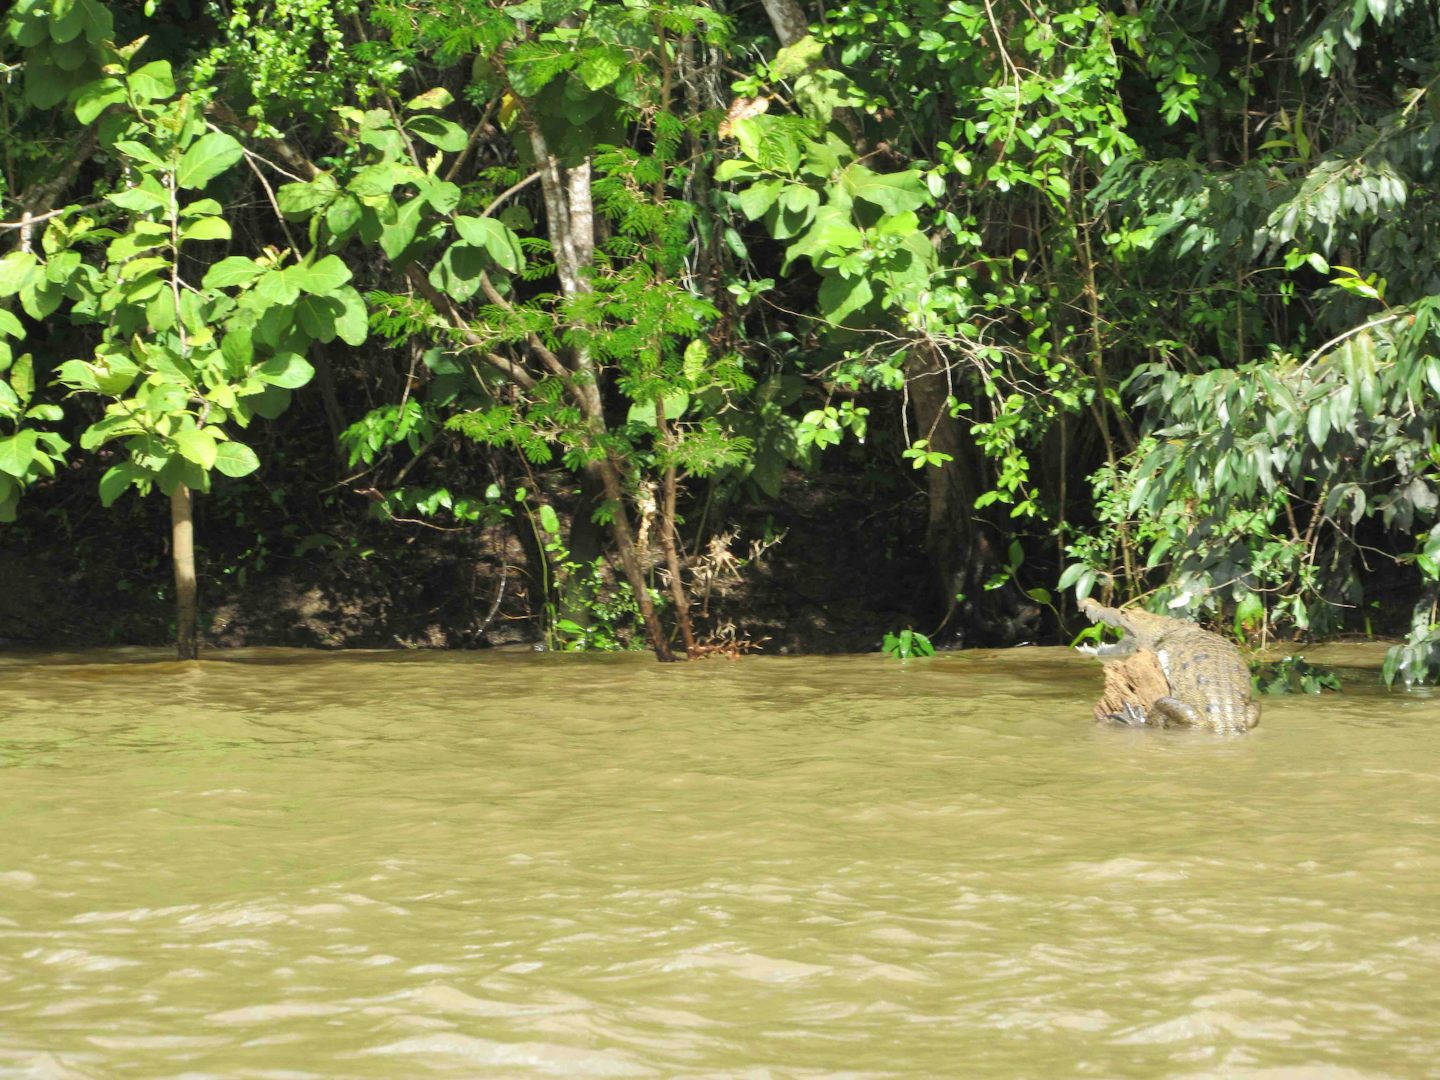 Crocodile on the River Wallace in Belize. We were on our way up river to meet the bus to take us to Altun Ha site.